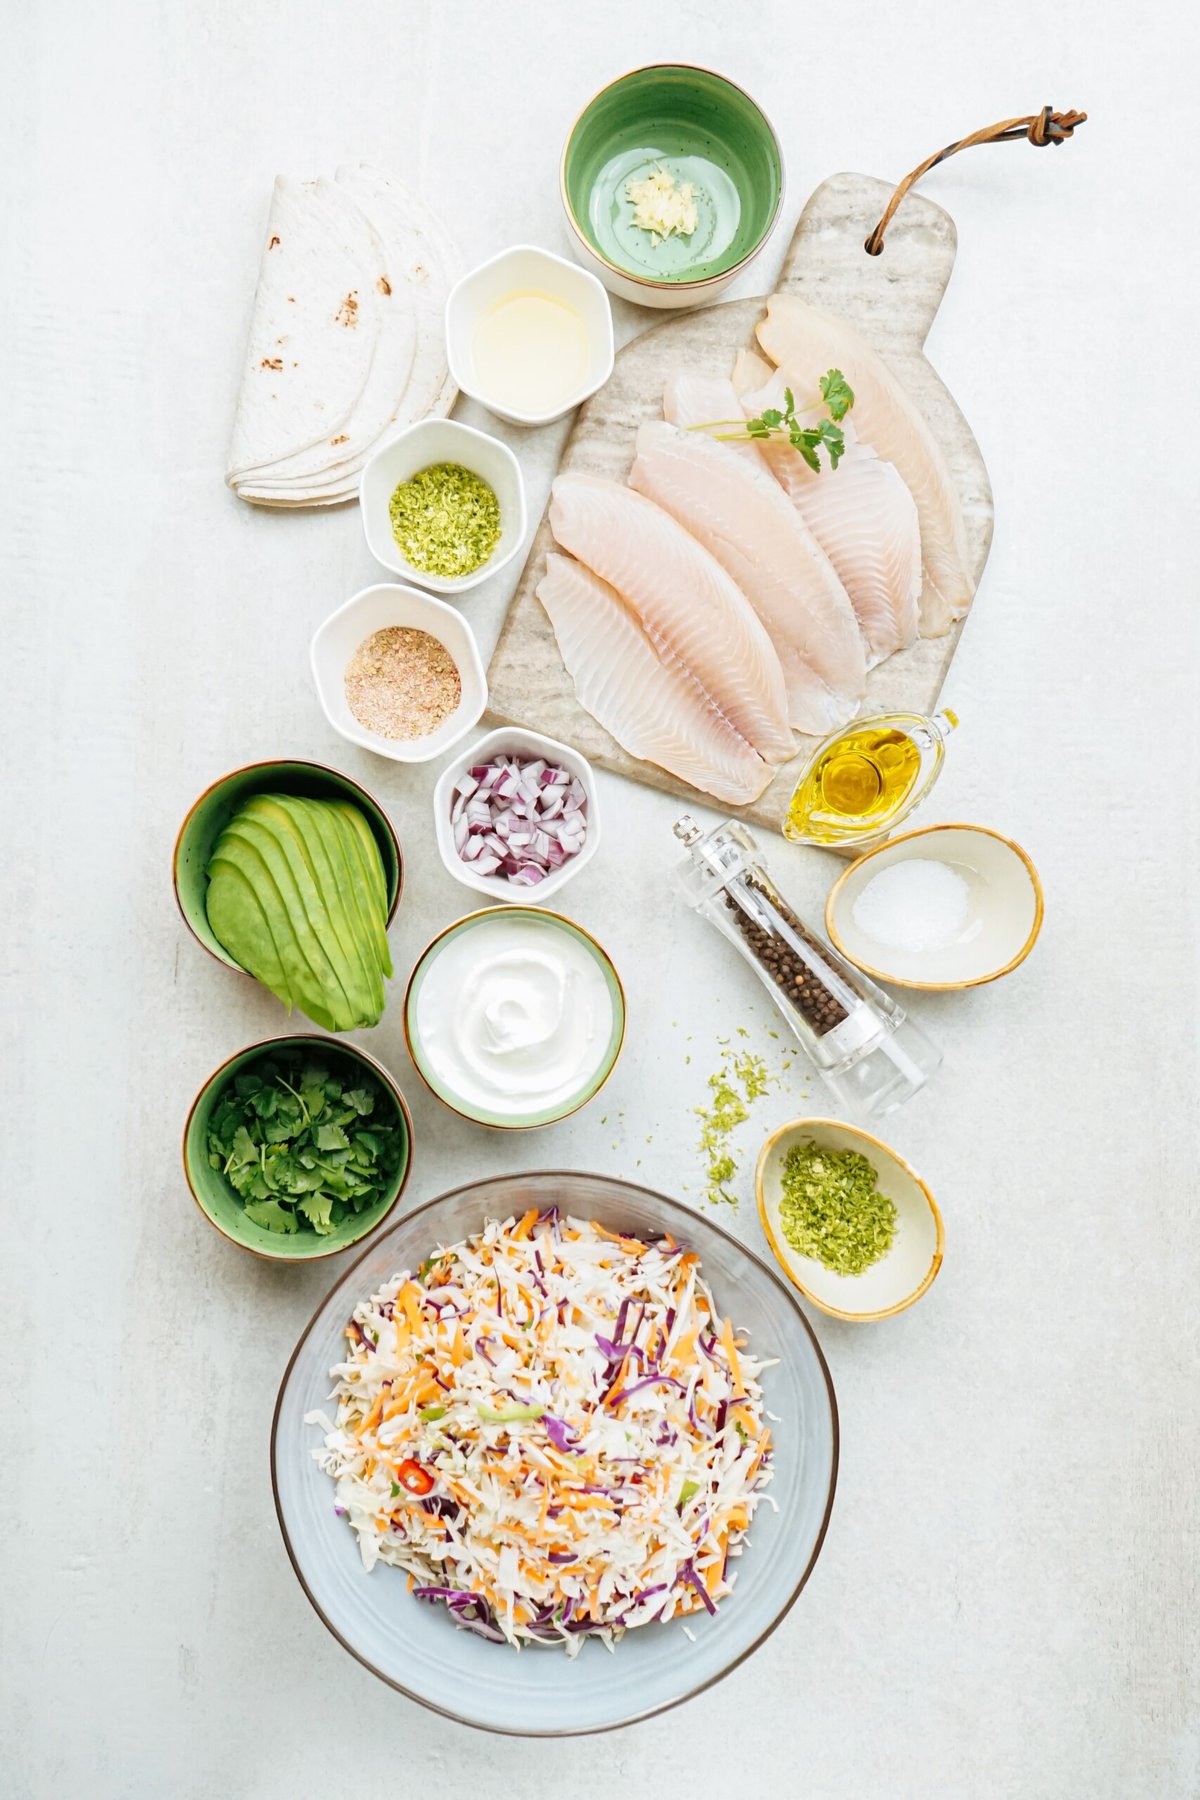 Ingredients for baked fish tacos